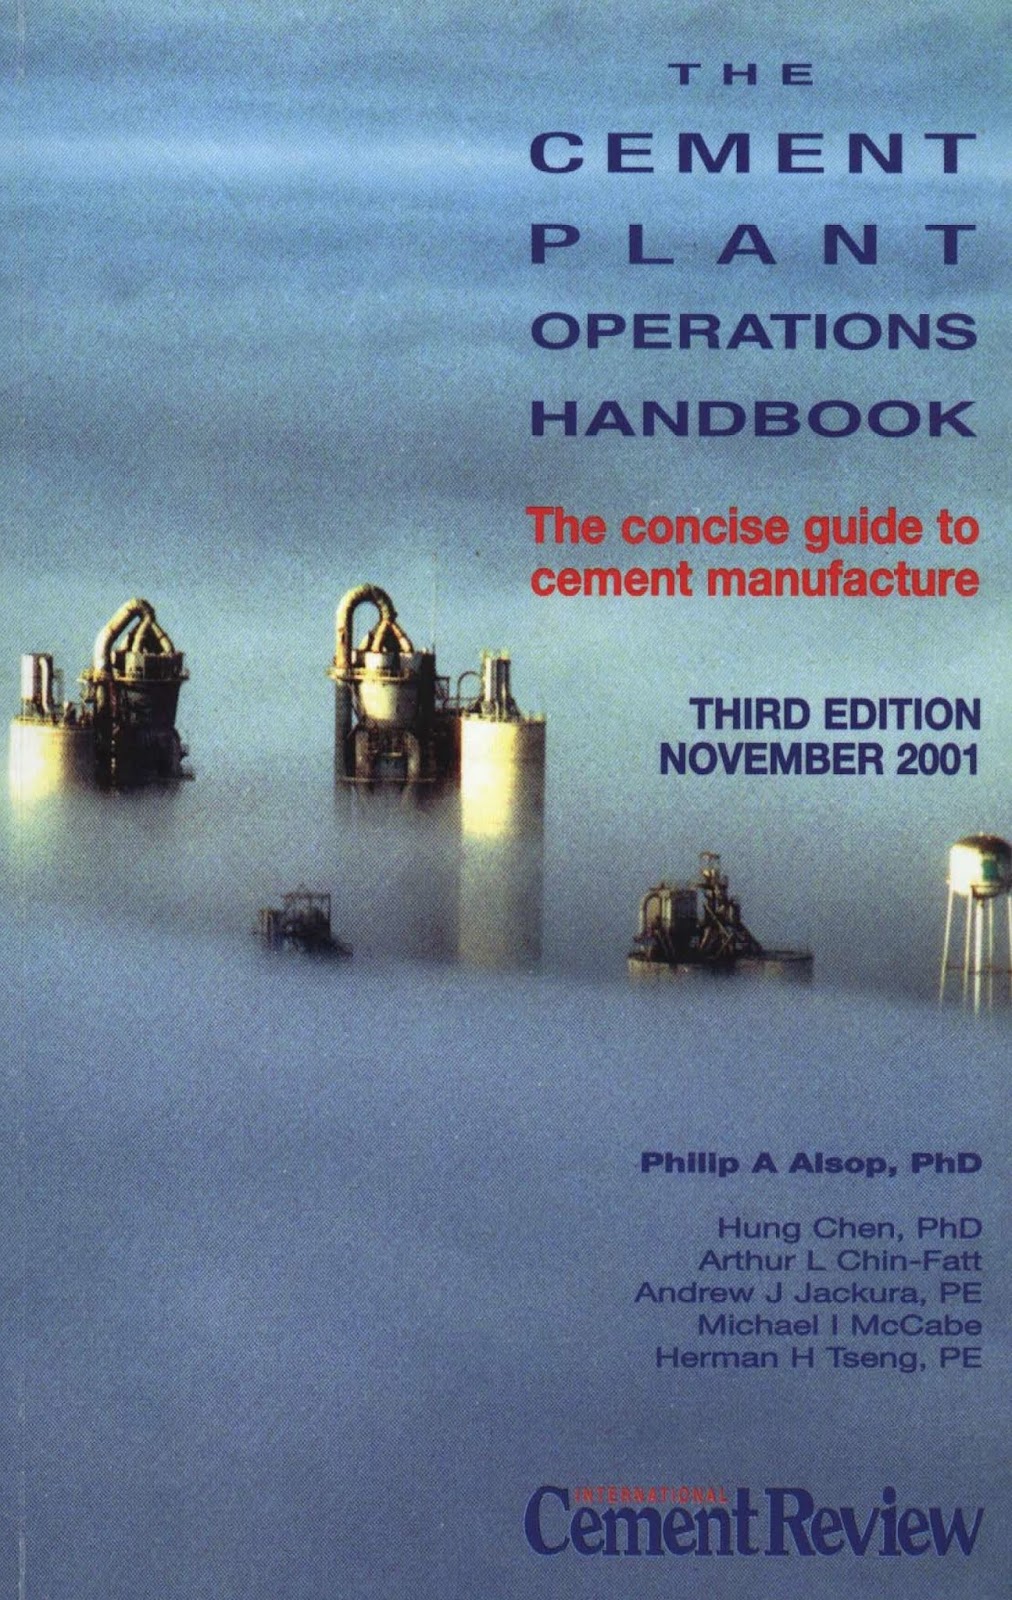 Engineering Library Ebooks: Cement Plant Operations Handbook for Dry